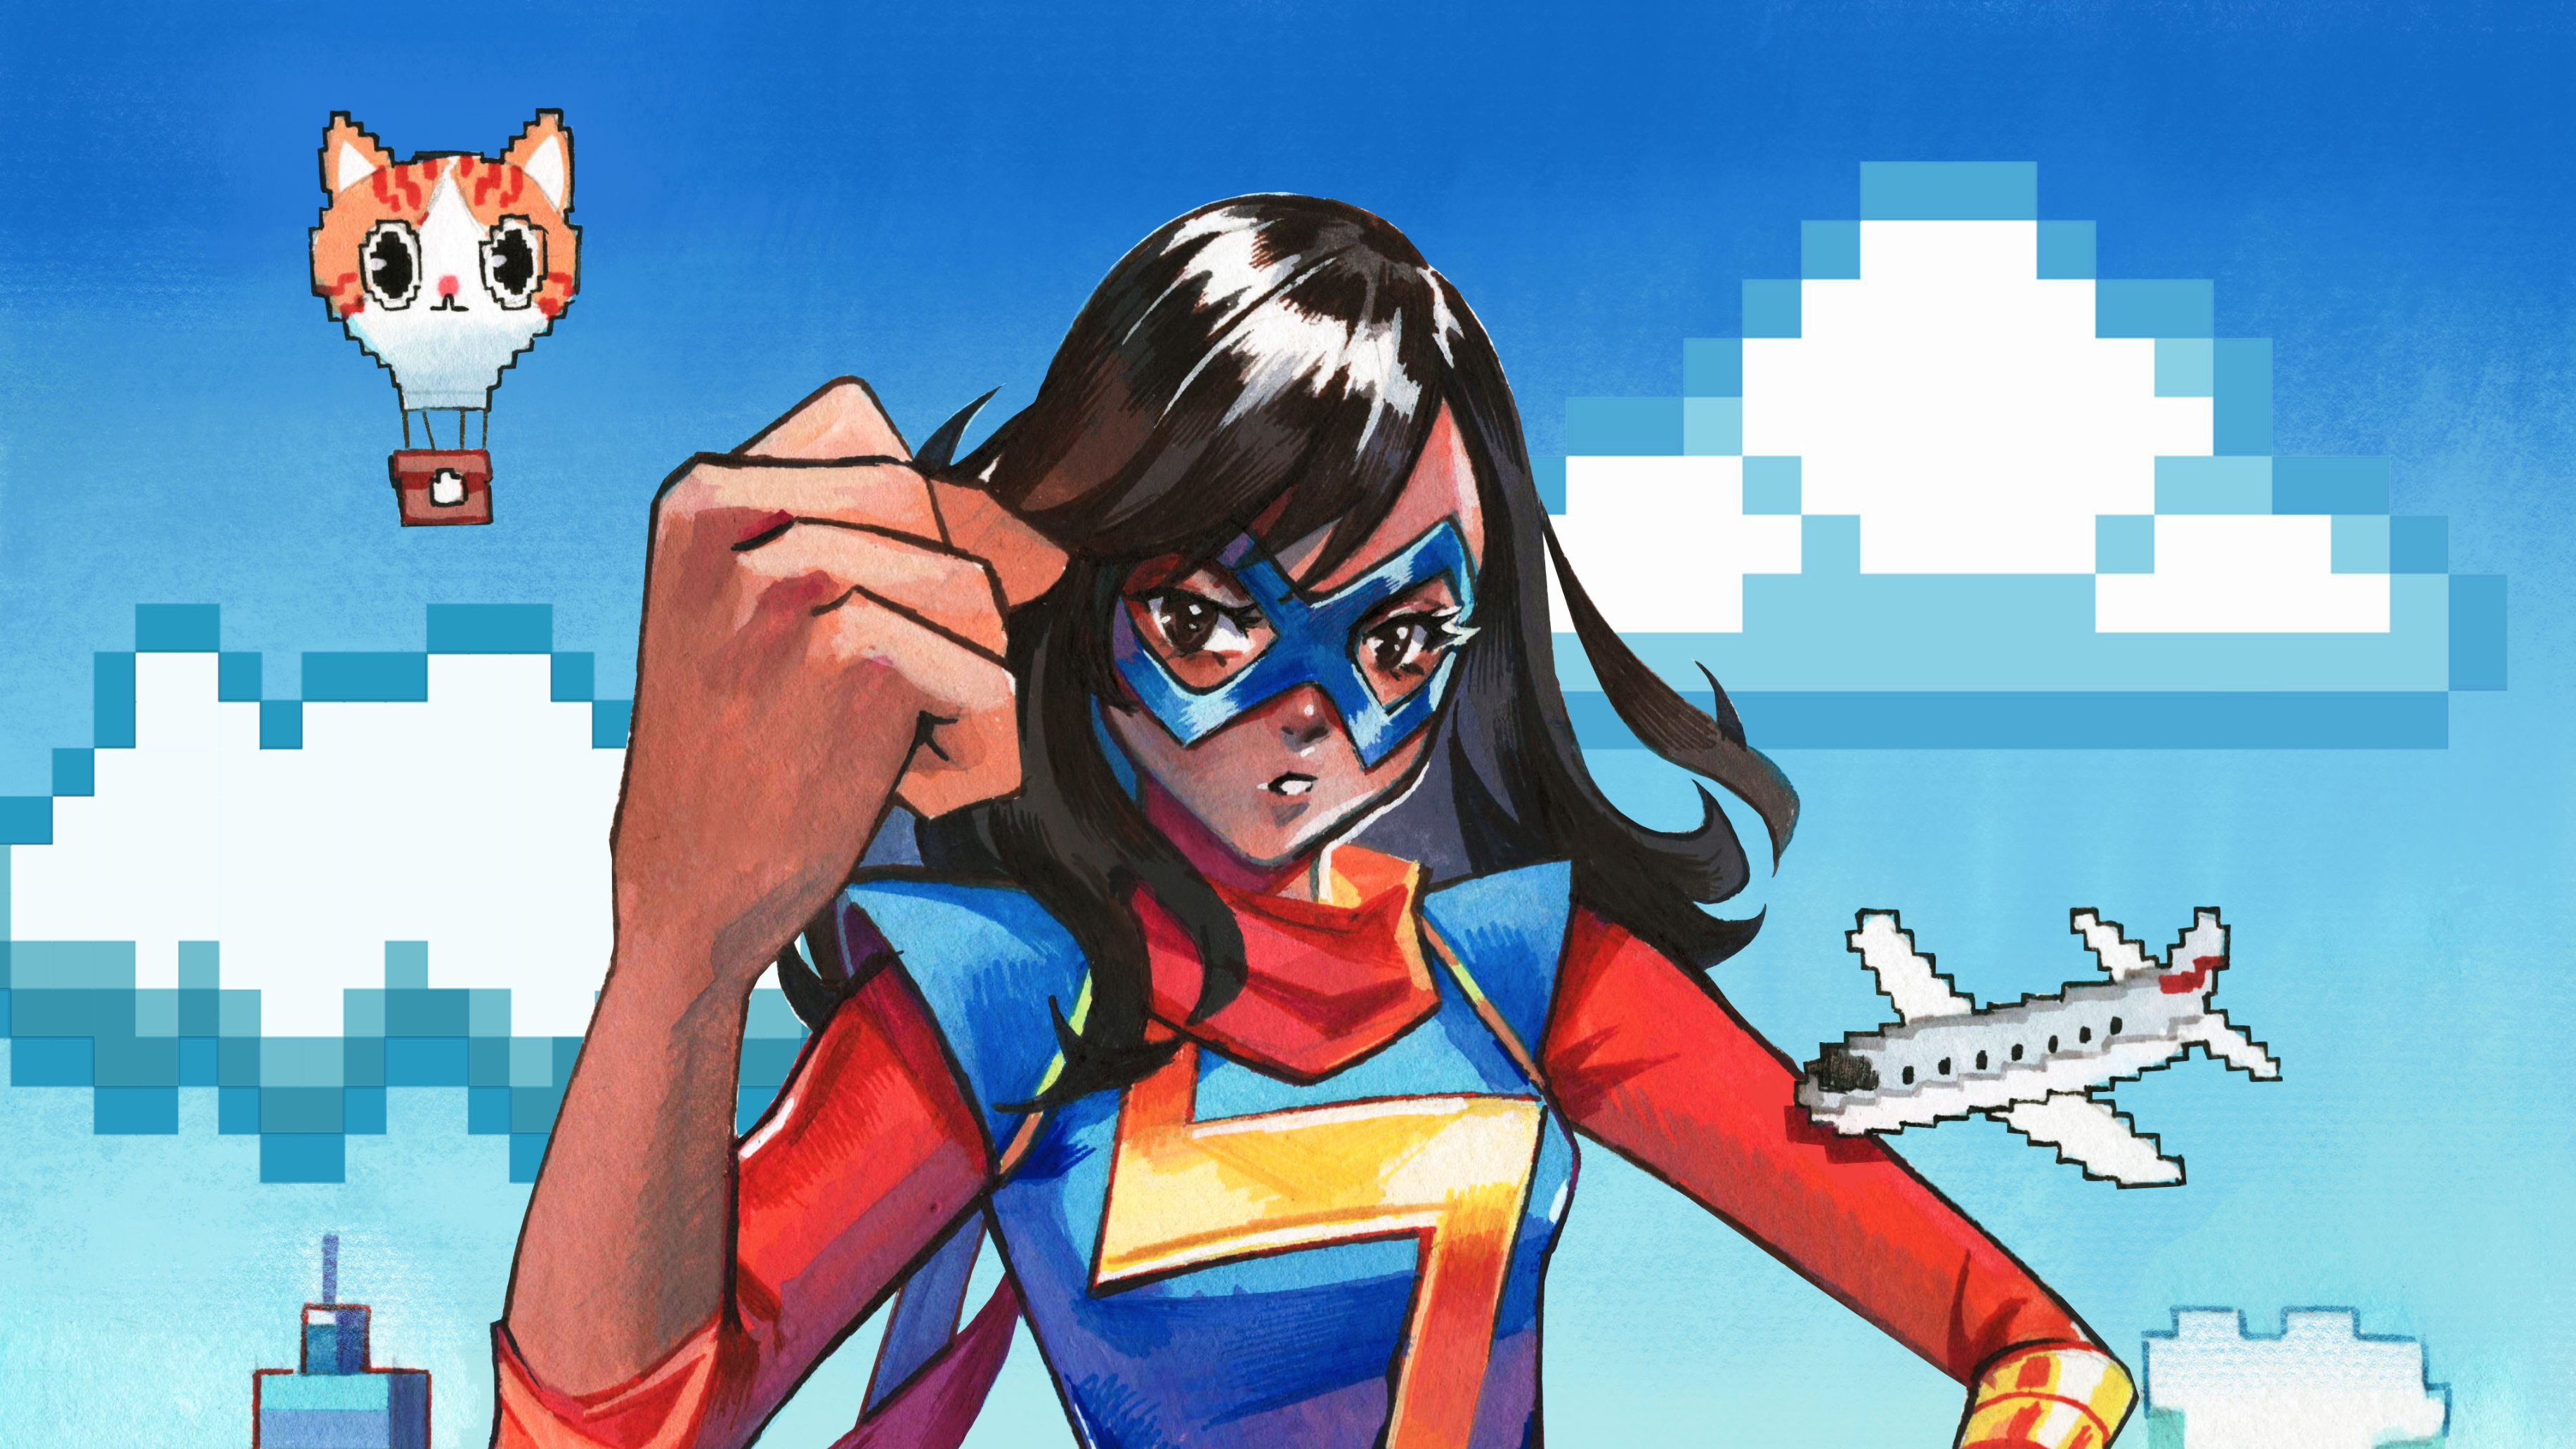 Marvel Snap' Finally Is Getting A Ms. Marvel Card, Here's What She Does